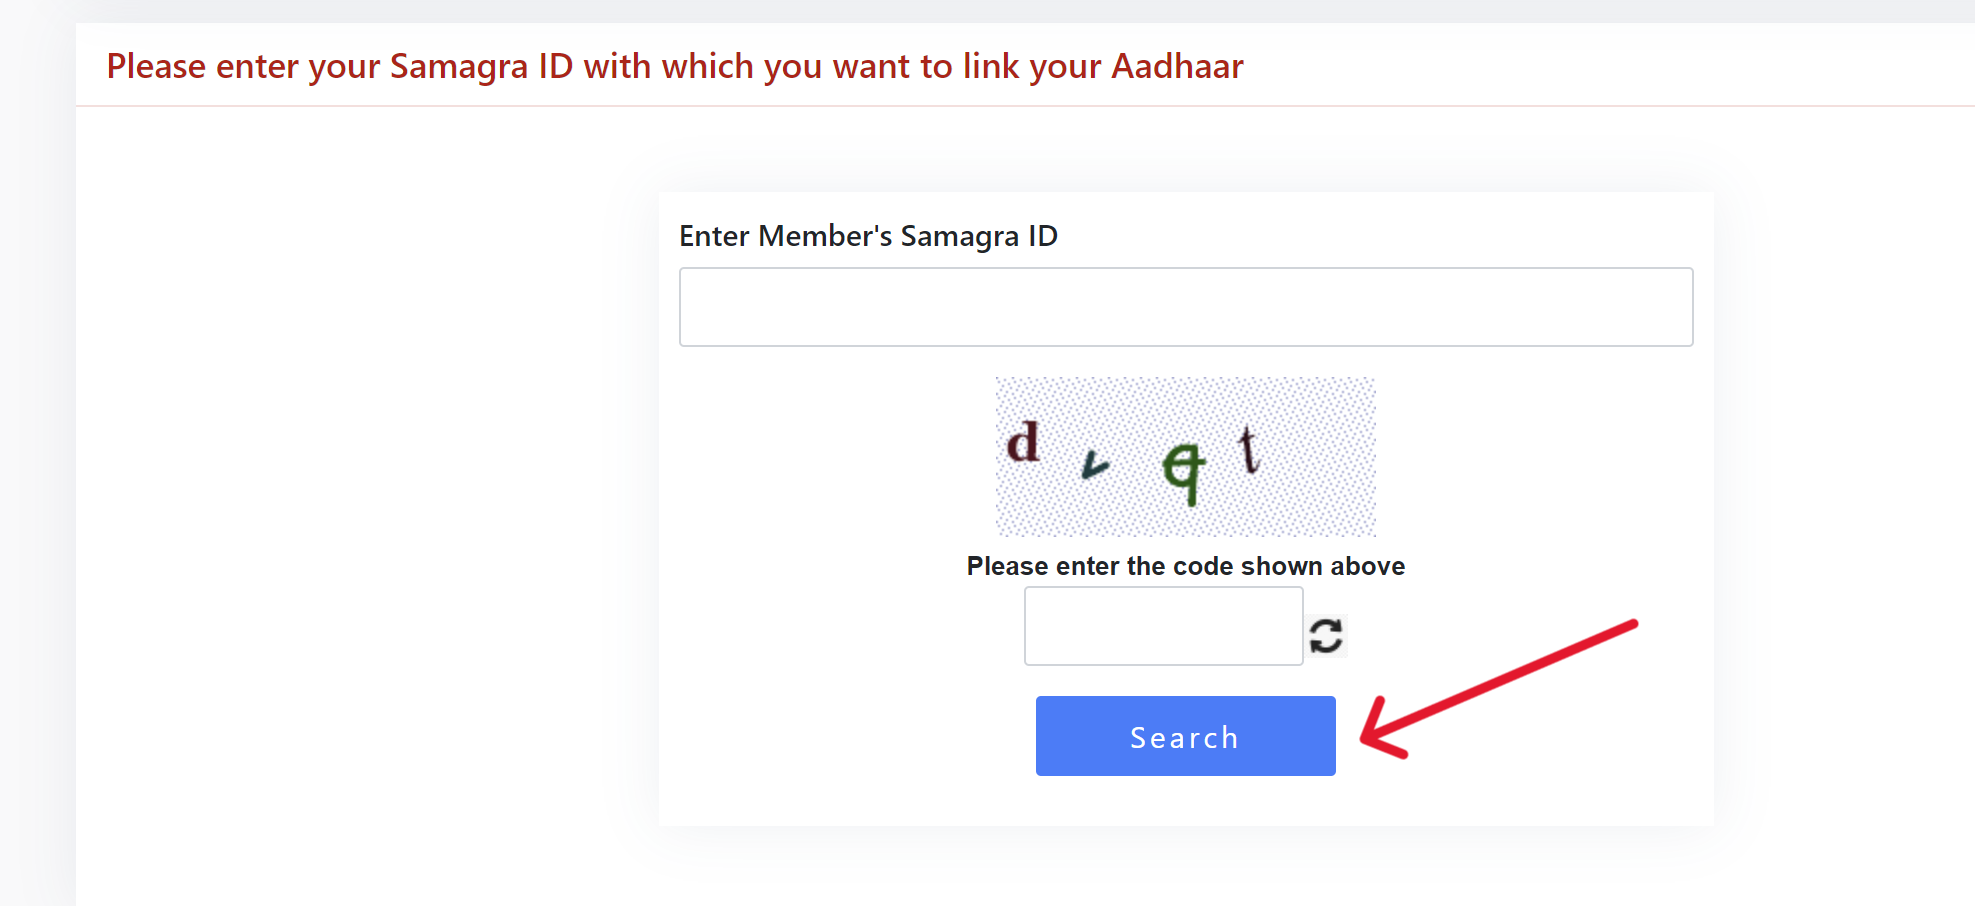 enter your Samagra ID with which you want to link your Aadhaar